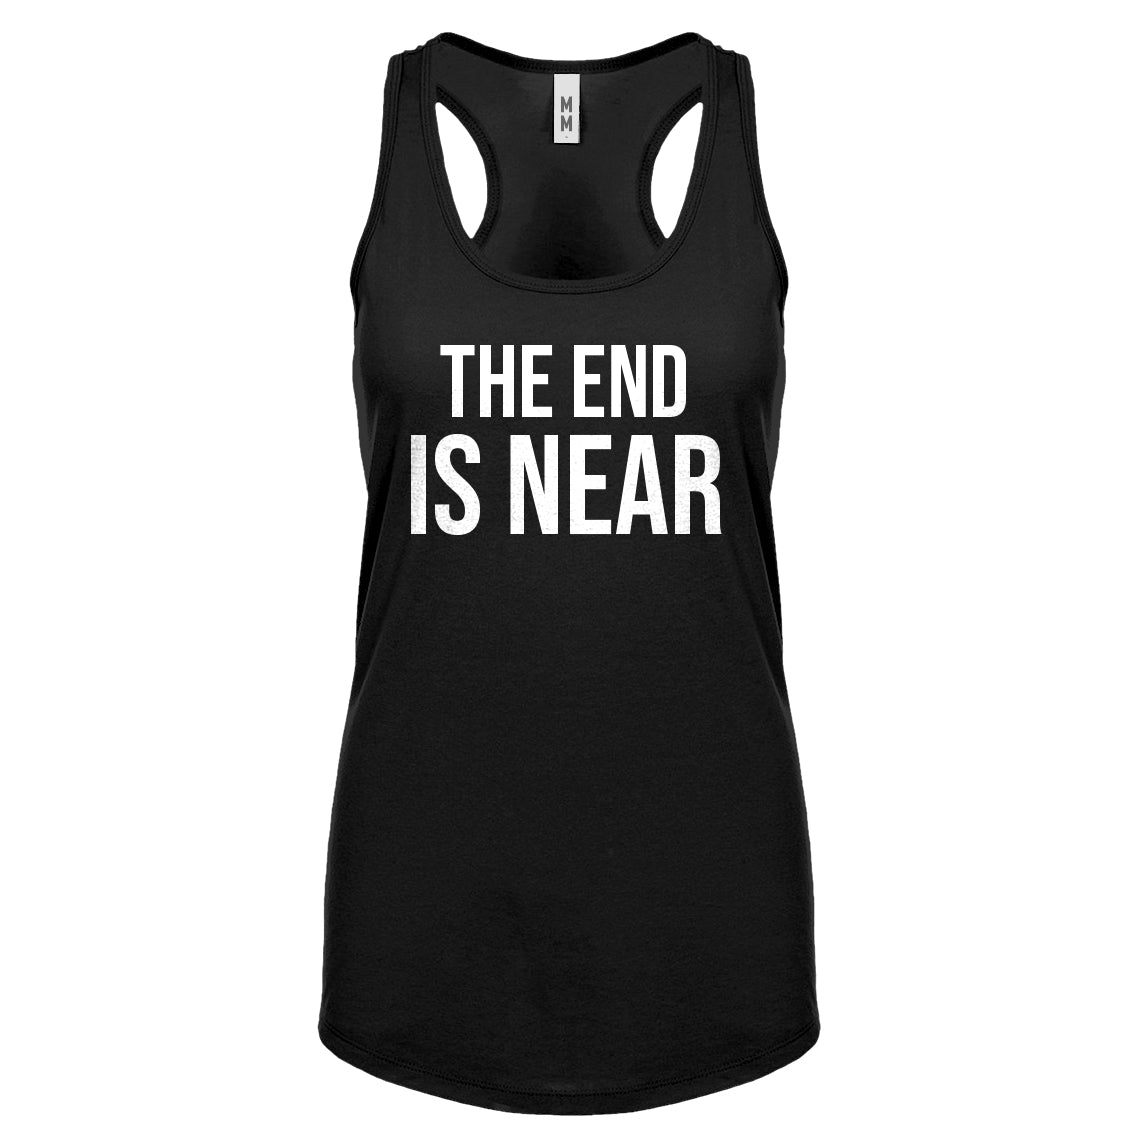 The End is Near Womens Racerback Tank Top